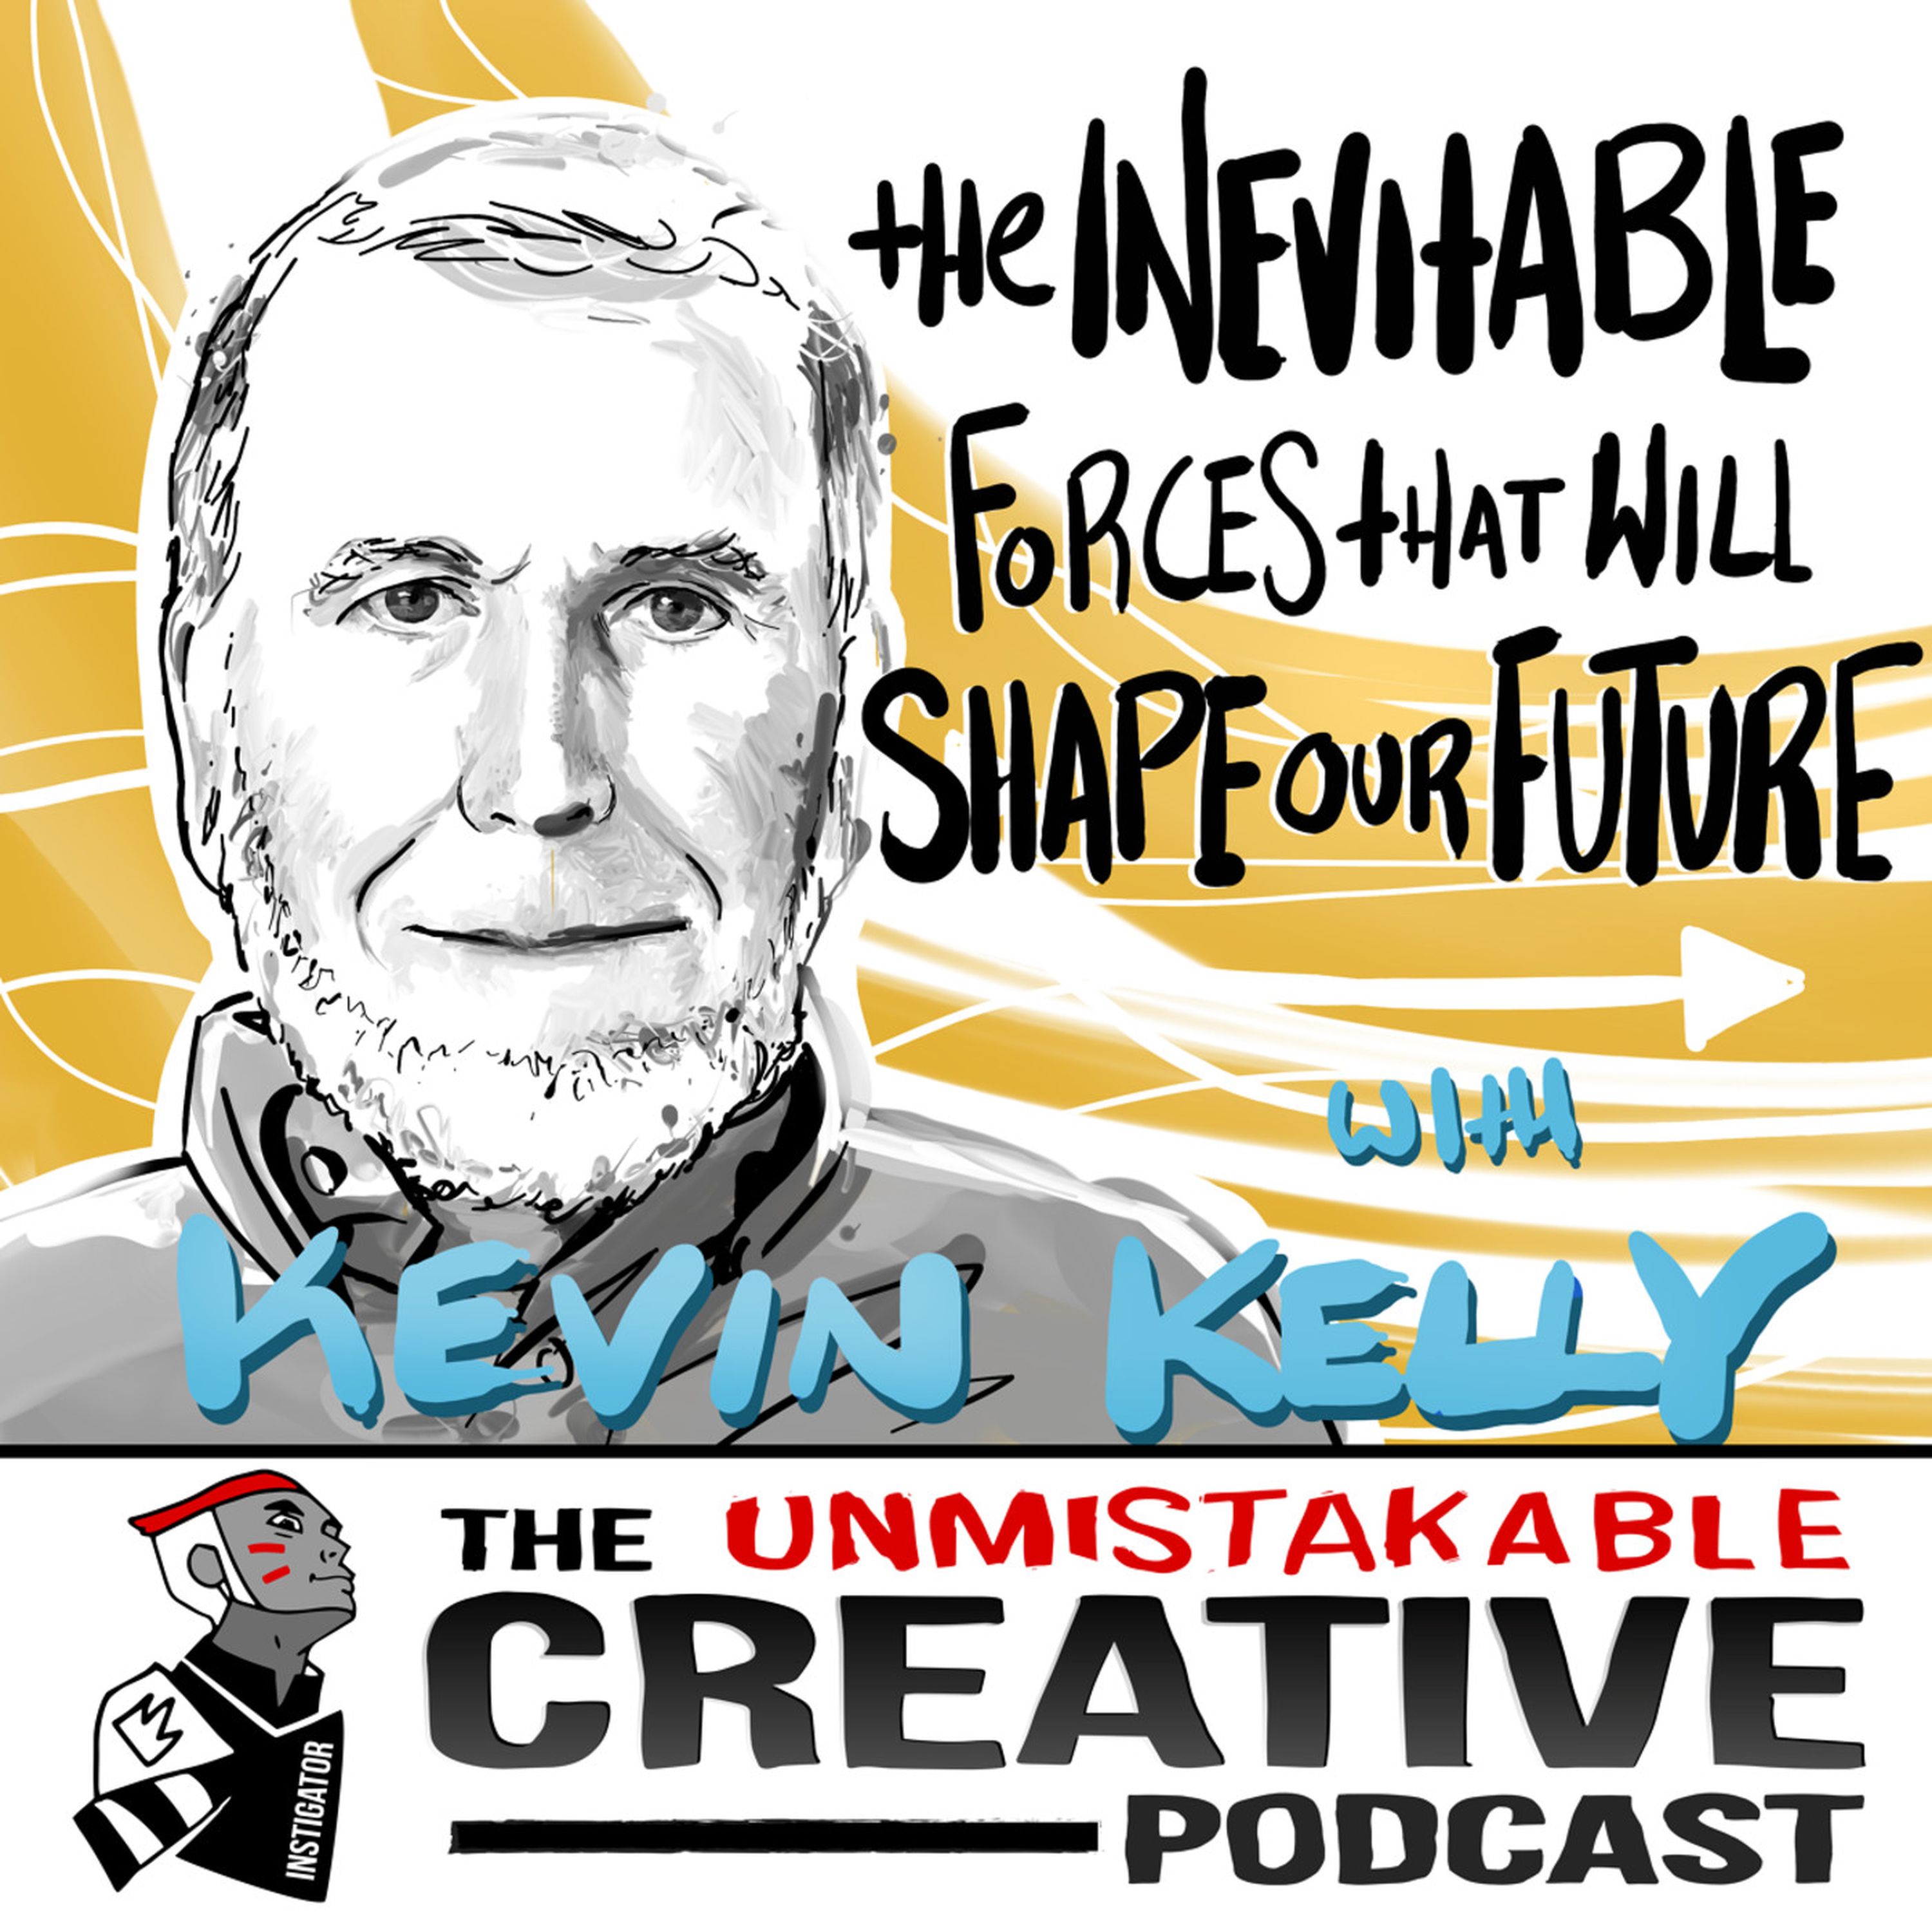 The Inevitable Forces That Will Shape Our Future with Kevin Kelly Image